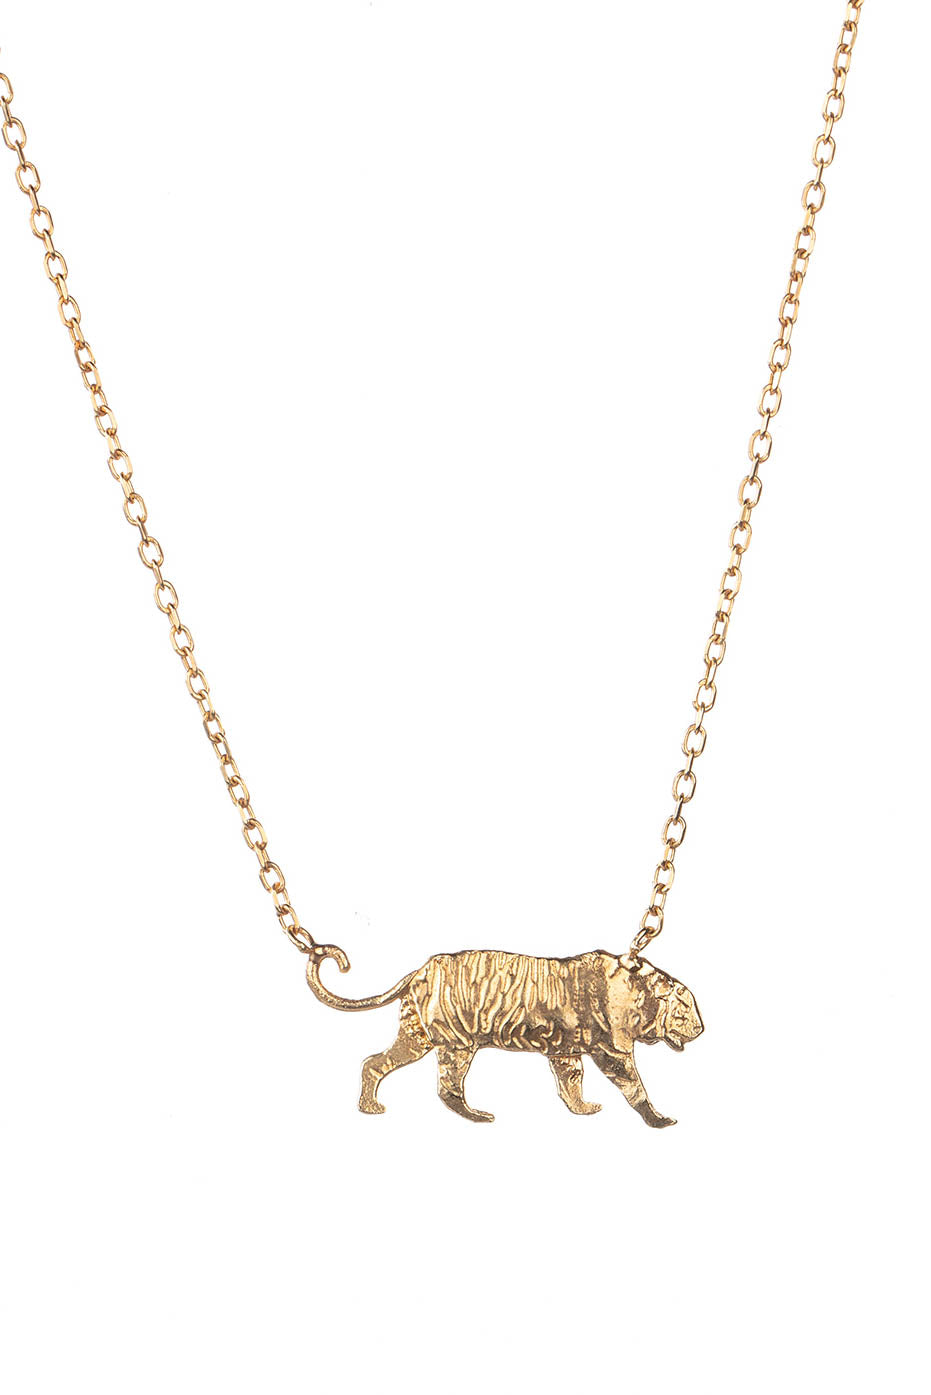 24K Yellow Gold Color Men's Tiger Pendant Atmospheric Gold Plated Tiger  Necklace Chain Pendants for Men